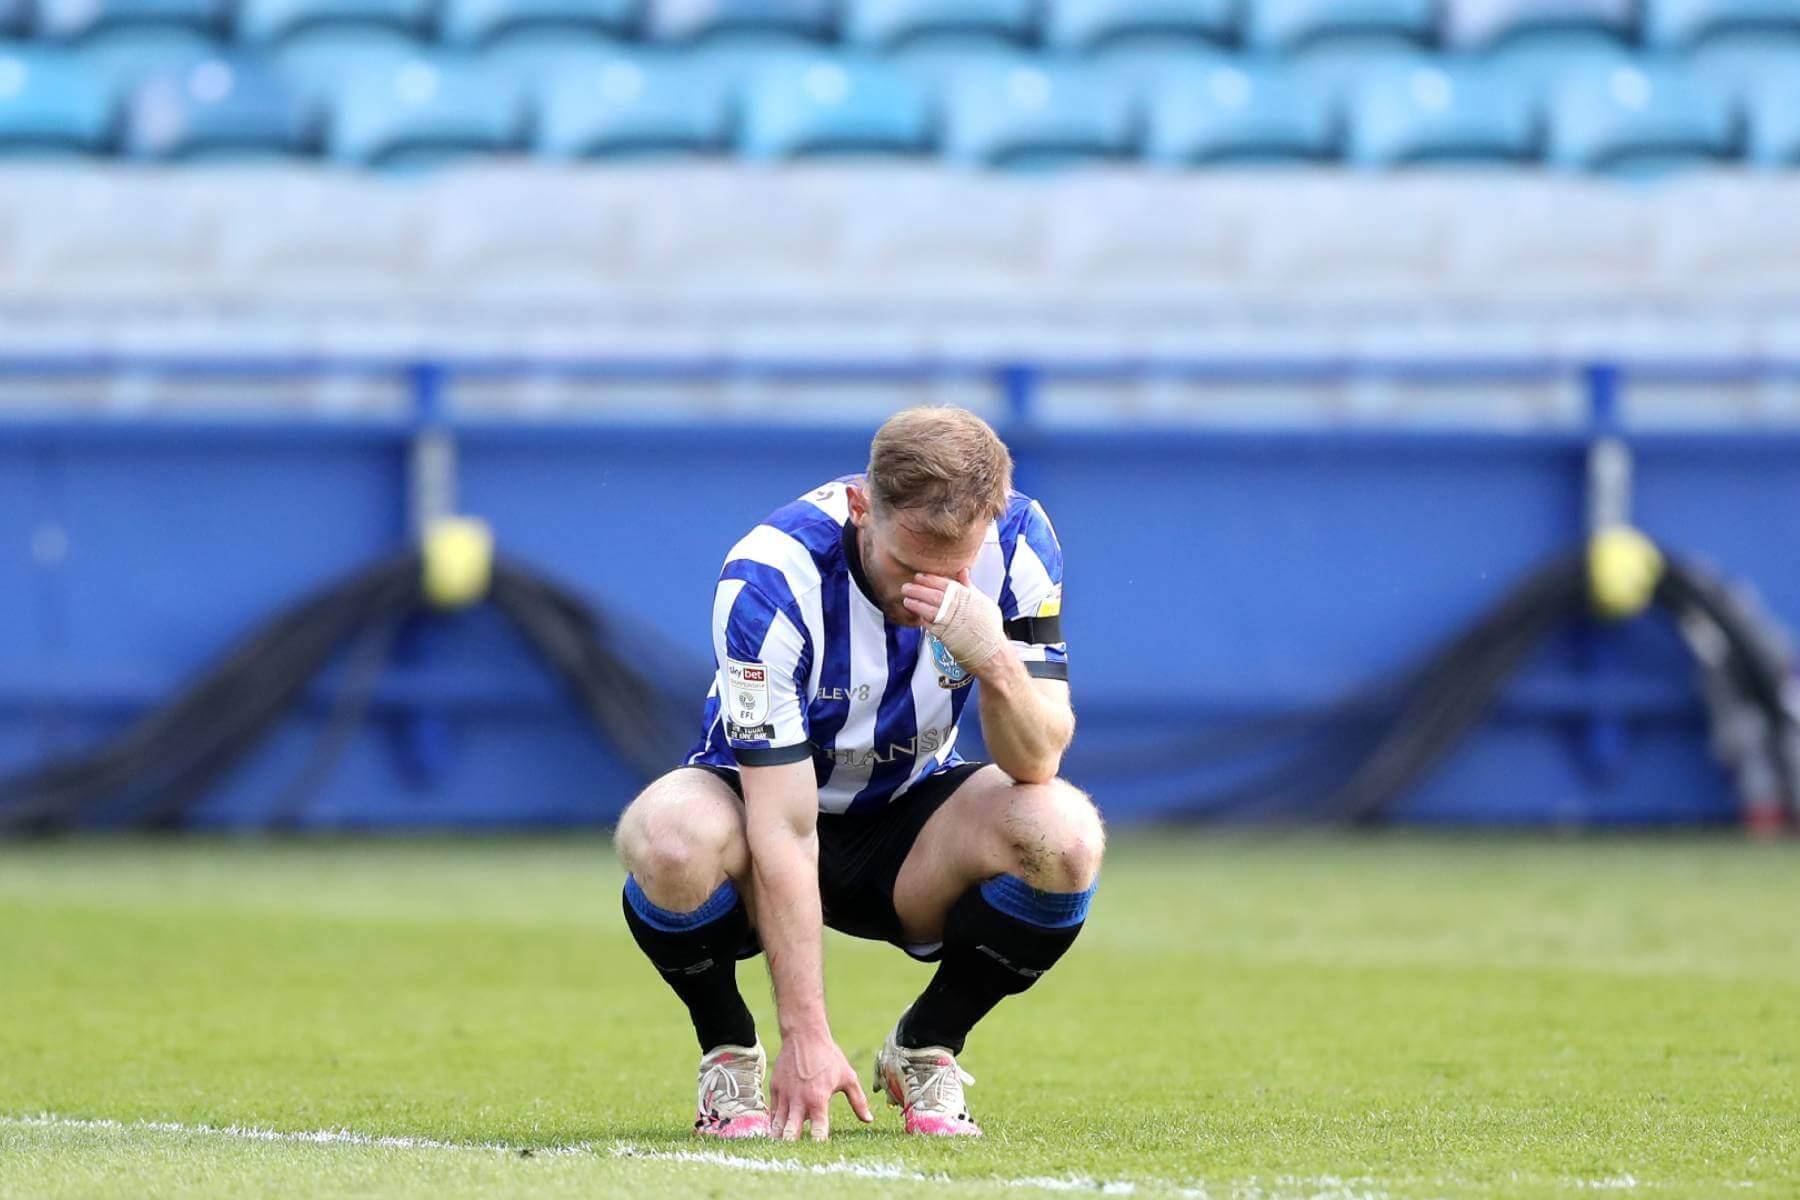 Sheffield Wednesday were docked points last season (Getty Images)